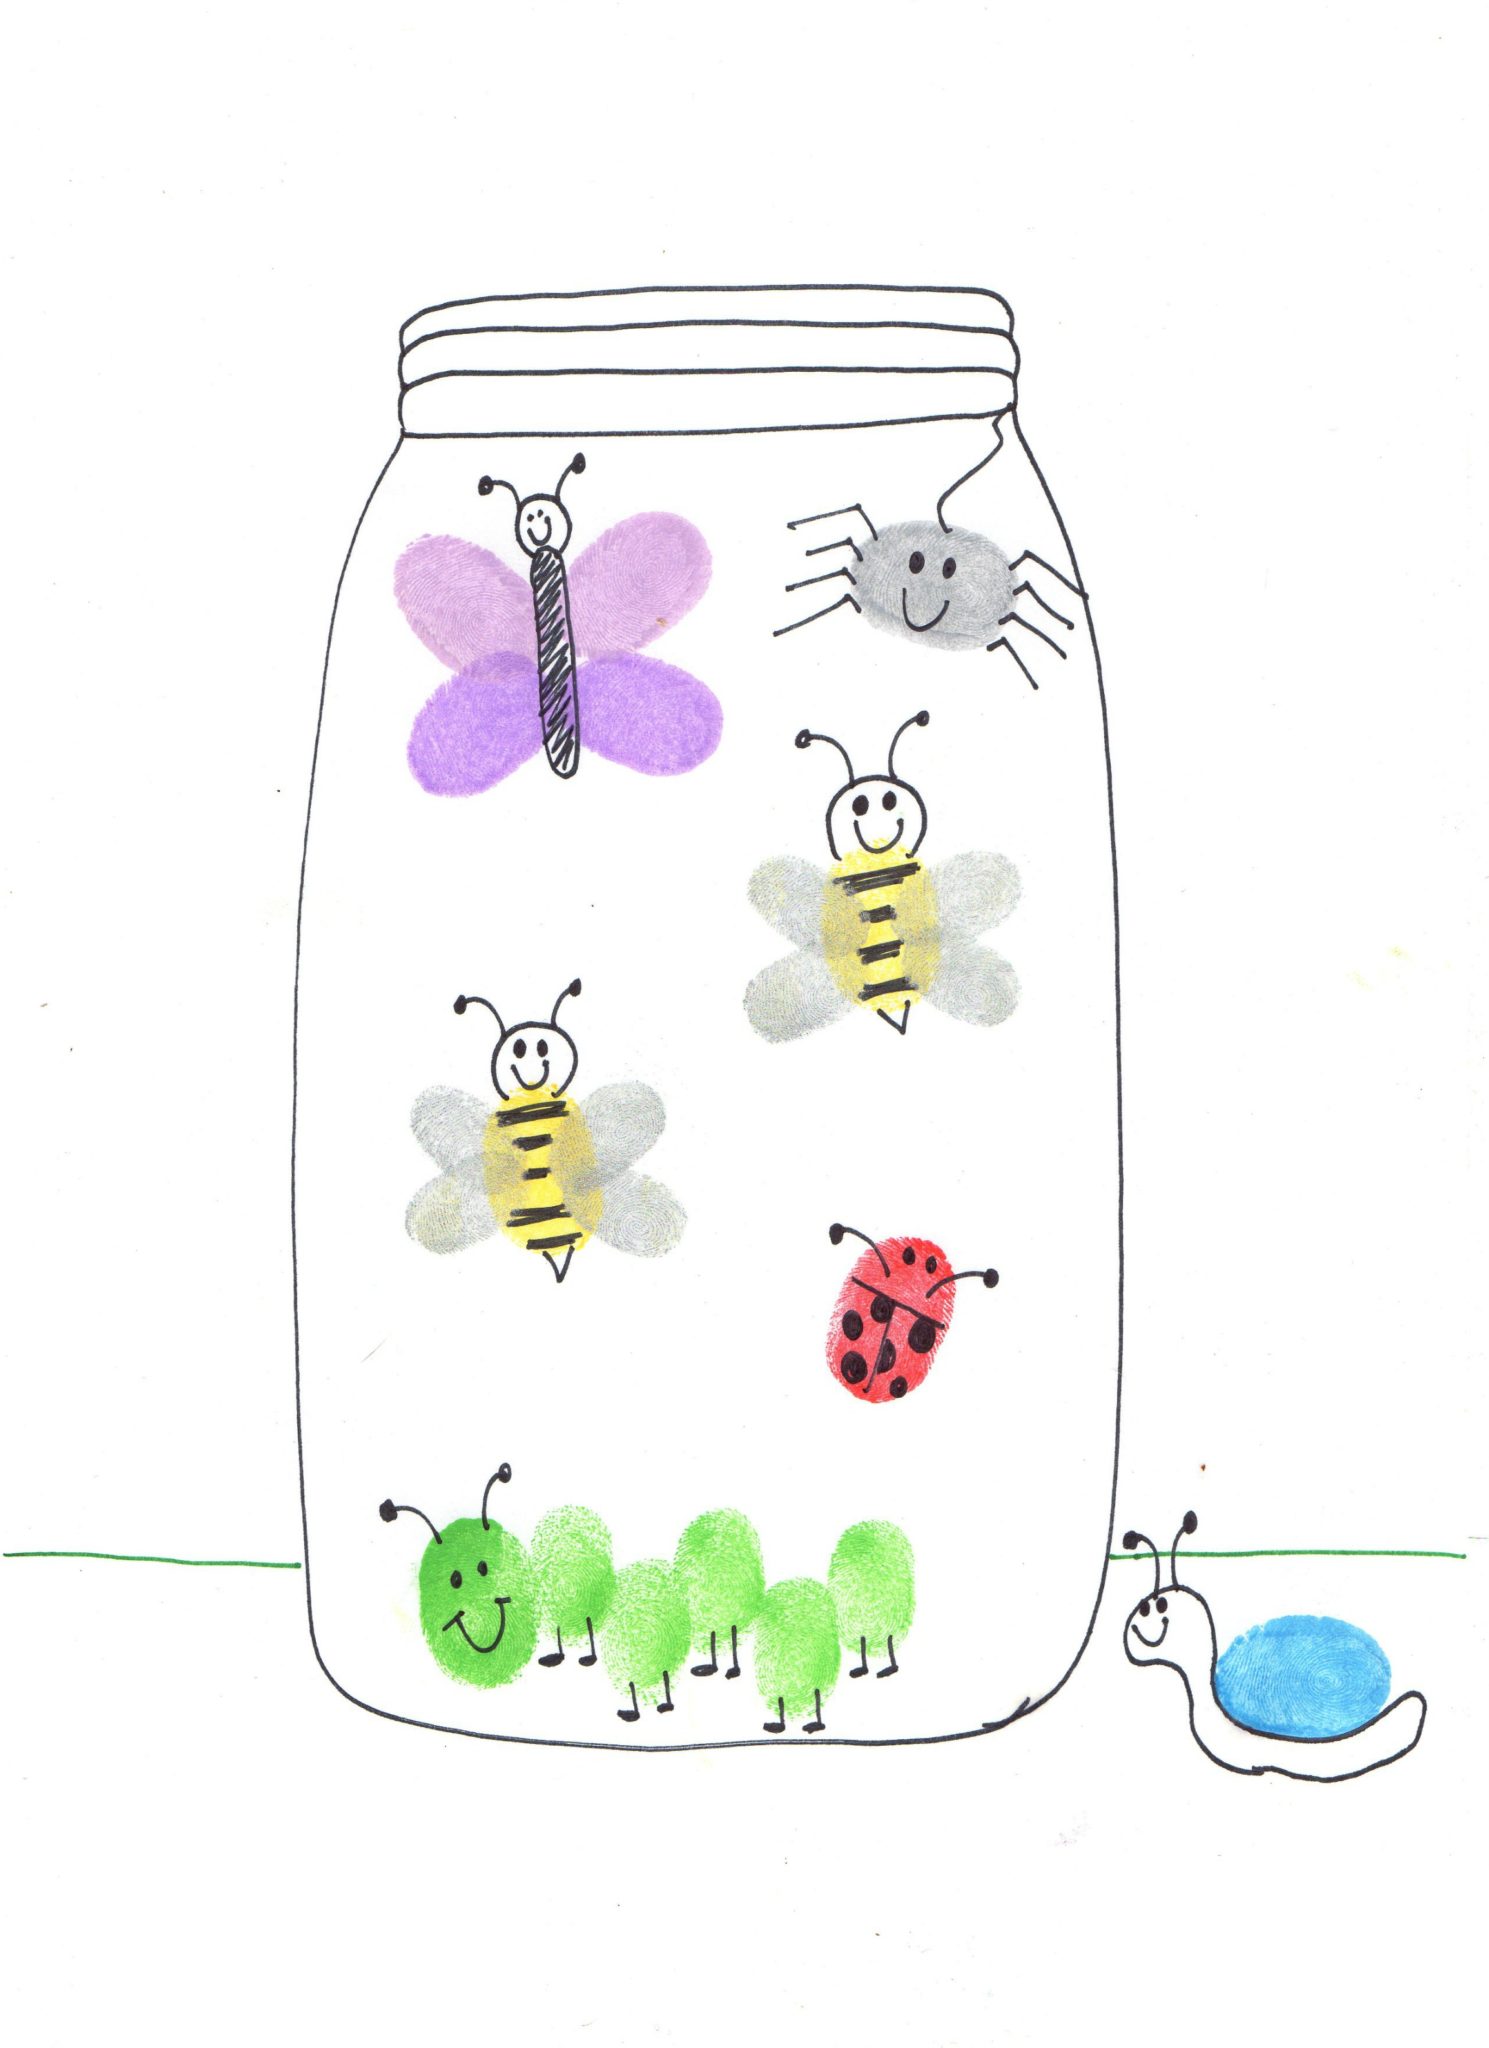 Learn how to draw insects with your fingerprints and these simple instructions! Includes free printable jar and sheets for your toddlers and pre-schoolers to follow!